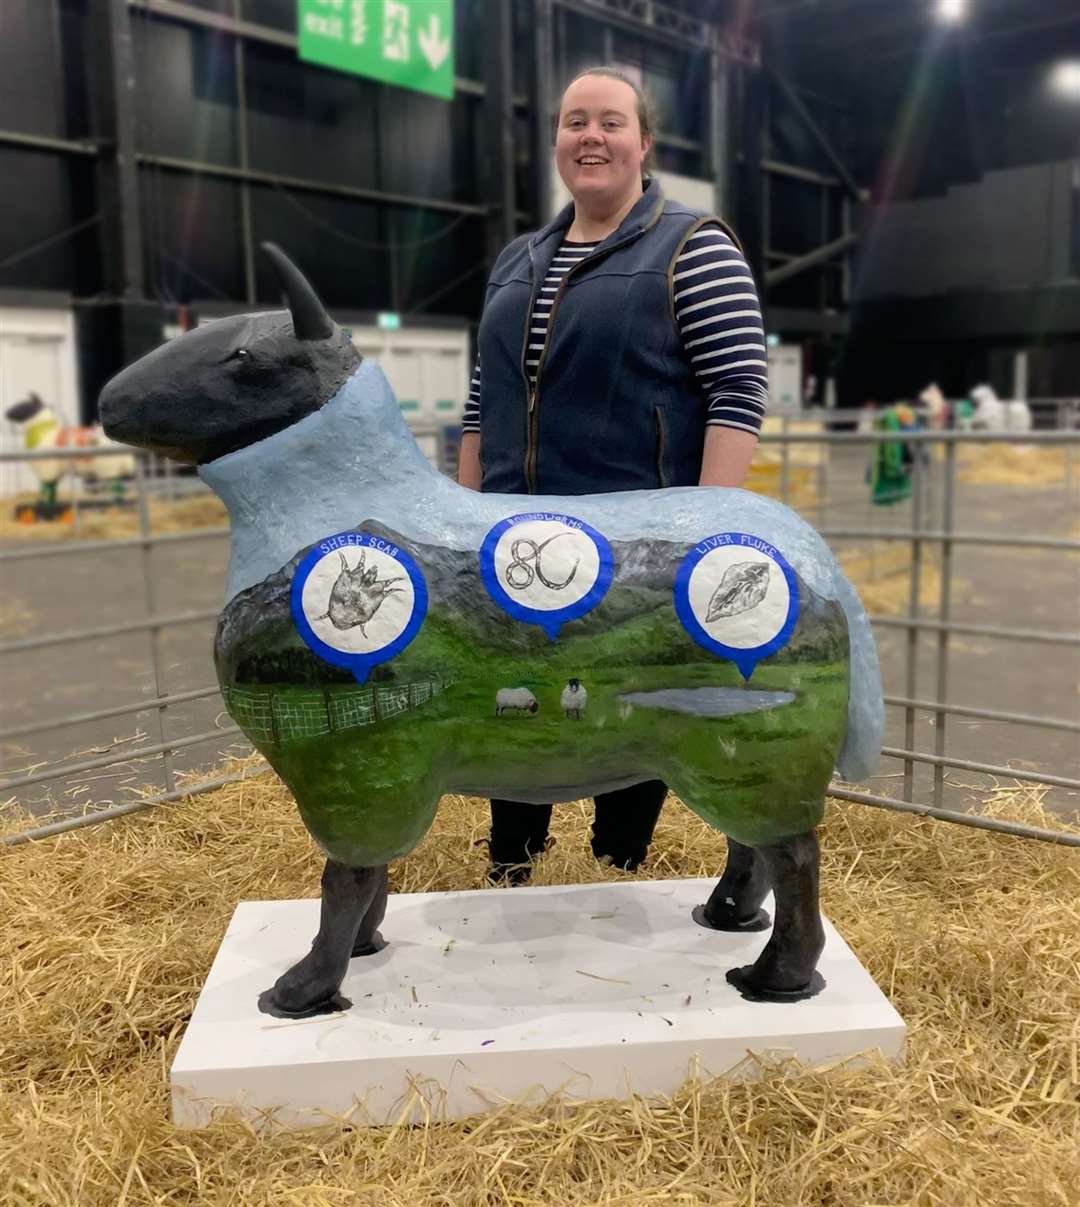 Eilidh Geddes with her sheep at Quoybrae mart. The design was inspired by her research into parasite control.